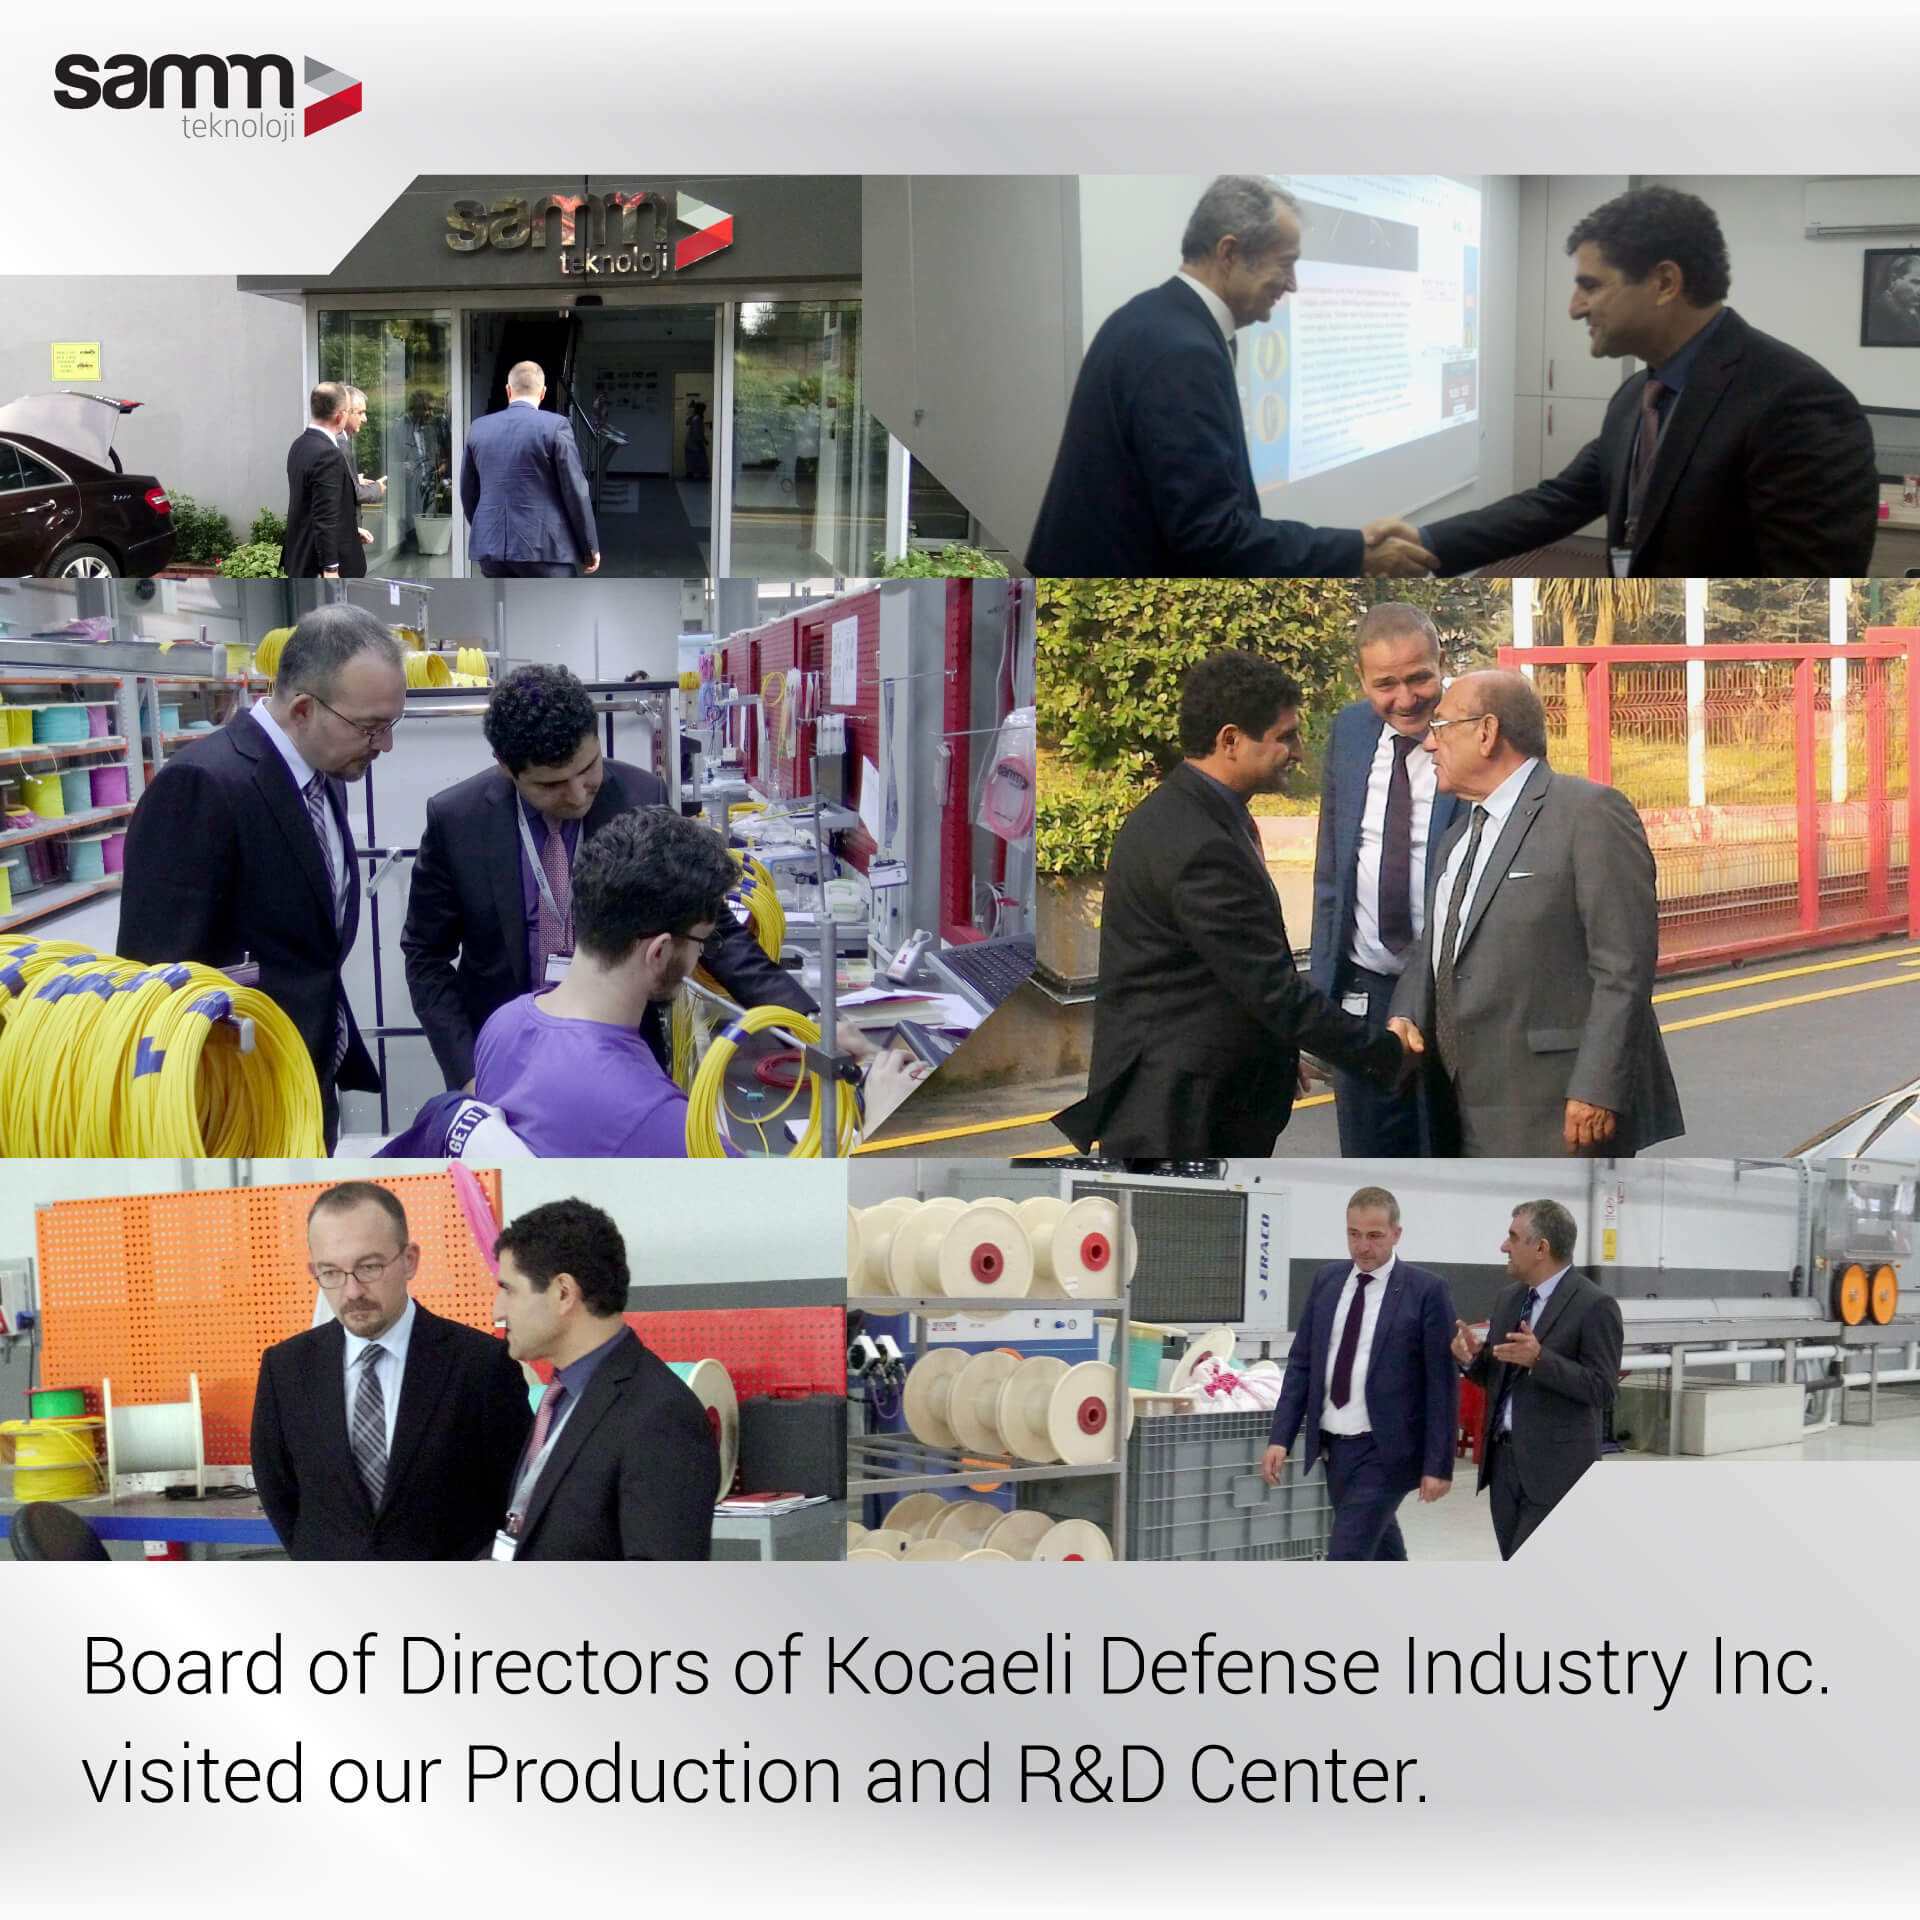 The Board of Directors of Kocaeli Defense Industry Inc.visited our Production and R&D Center.